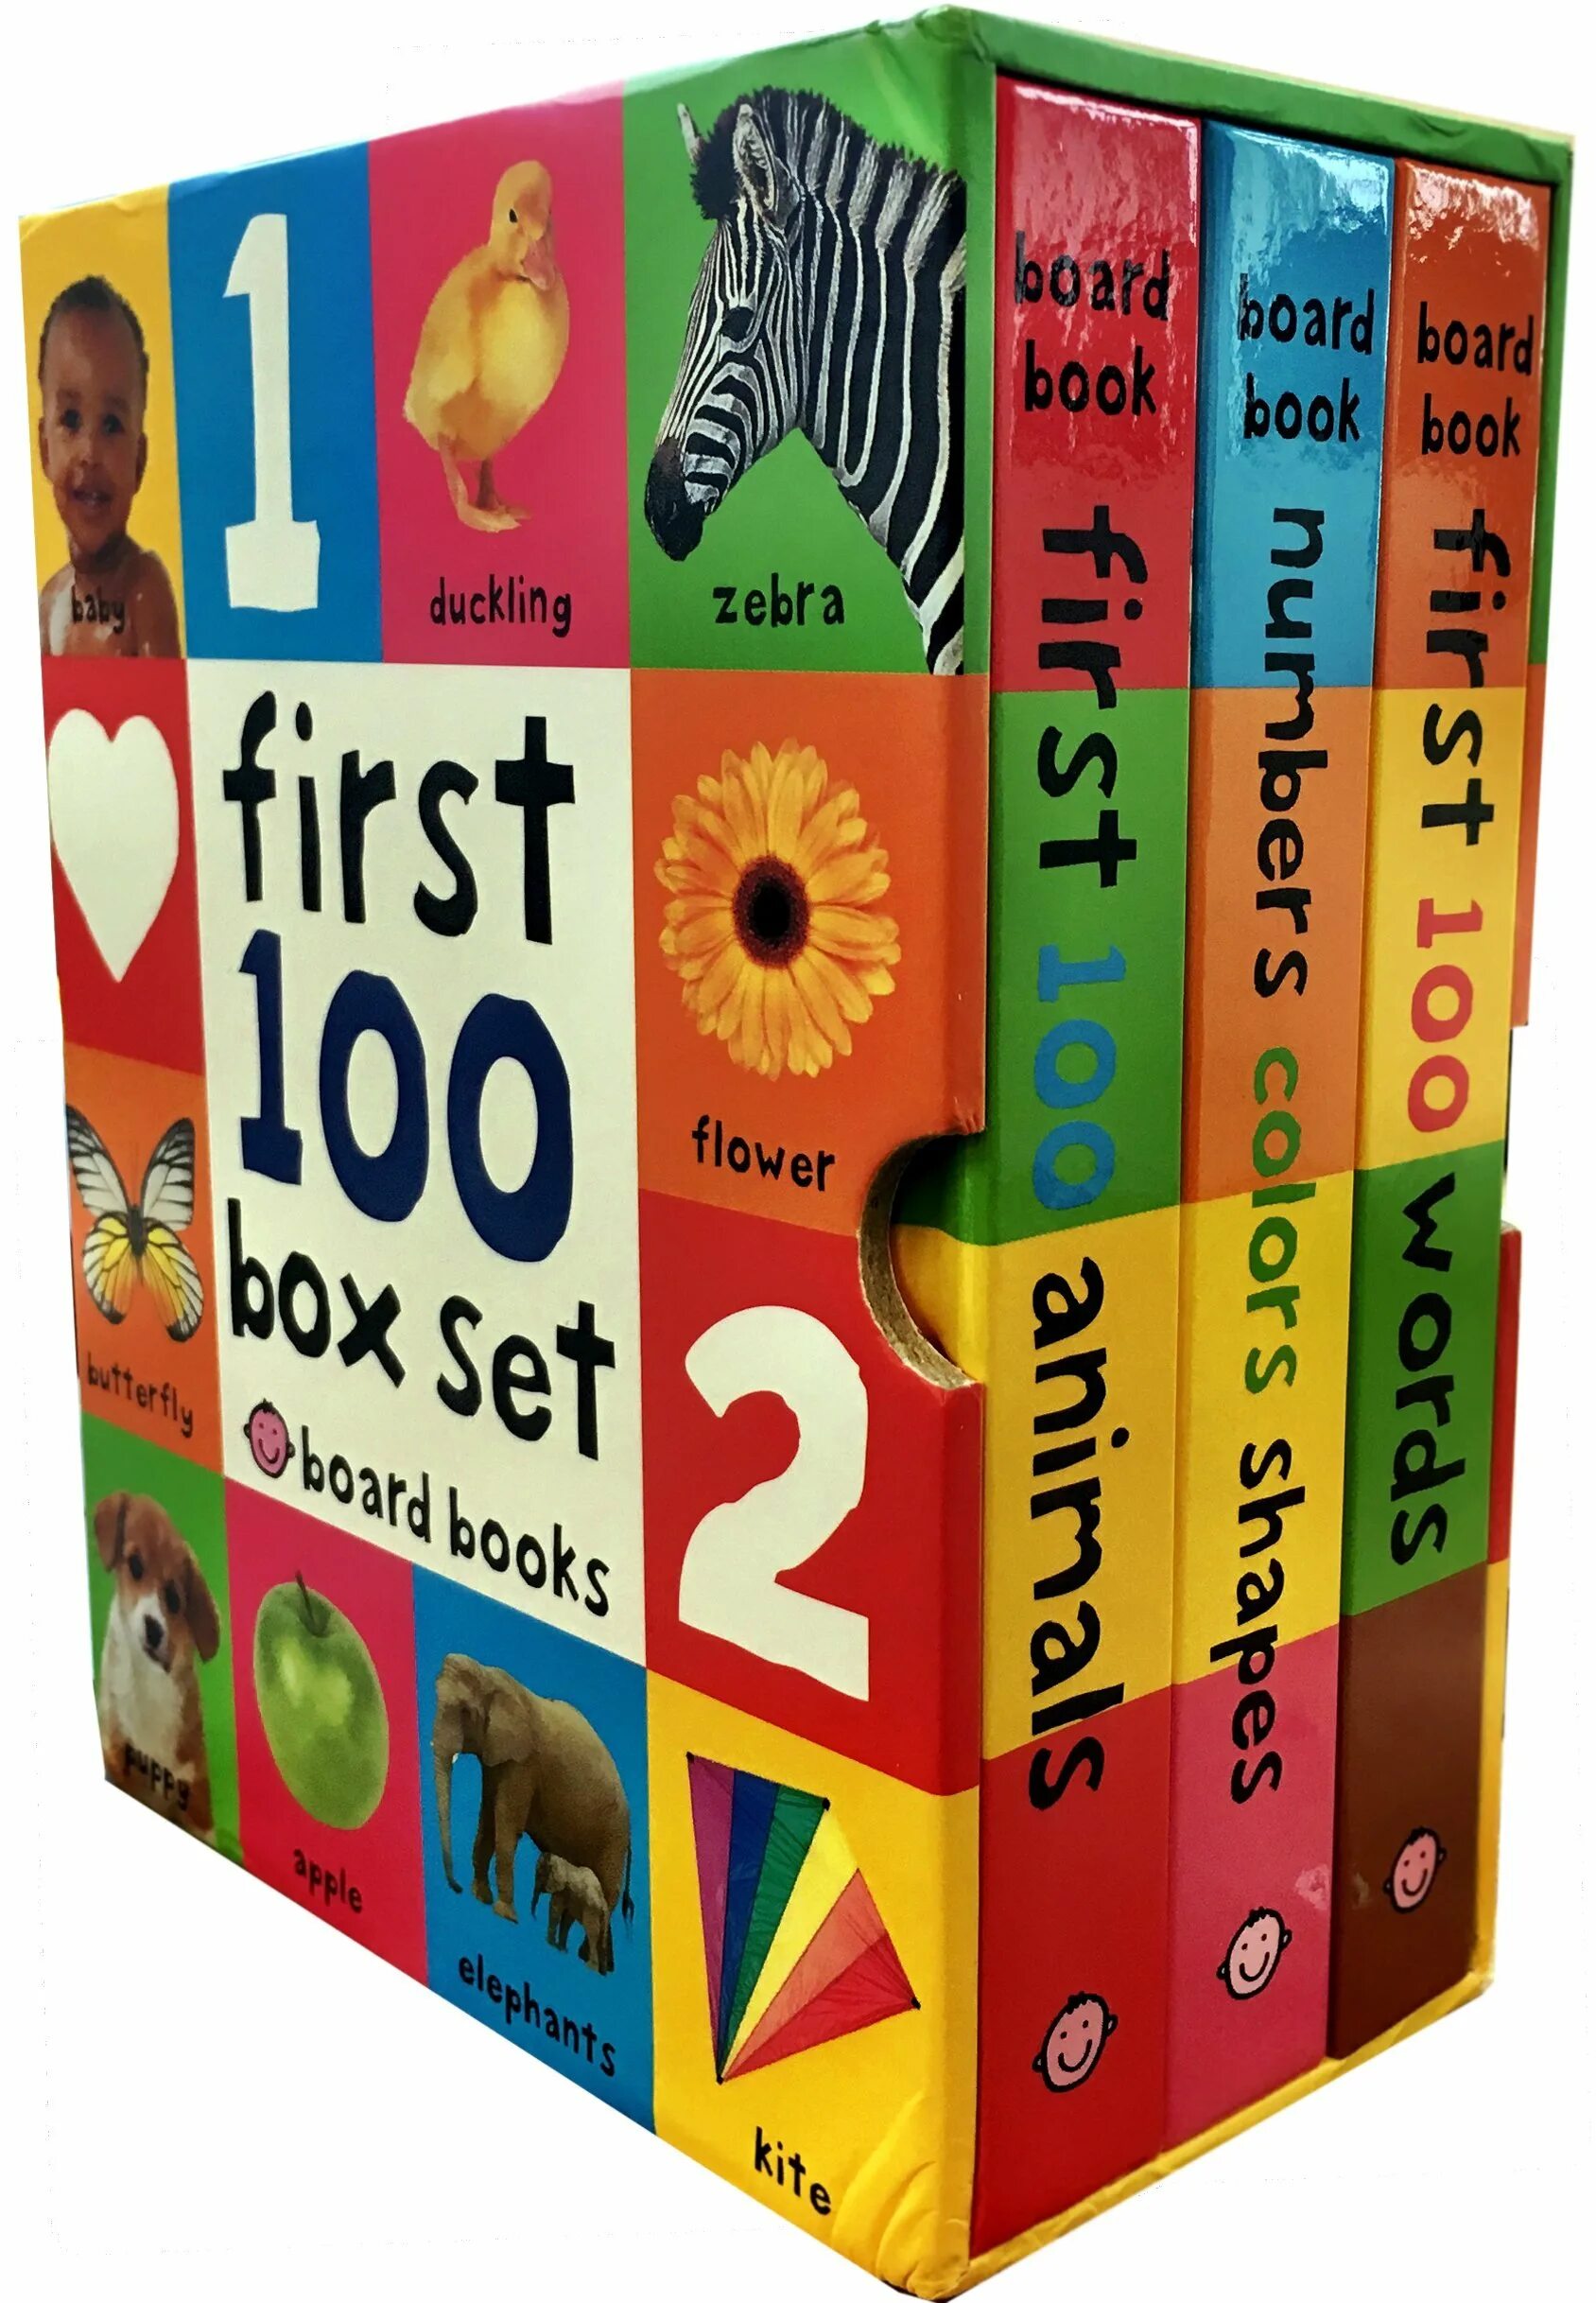 First 100 animals book. Книга с настольными играми. Книга numbers. Priddy Roger "first 100 Words". First book ru